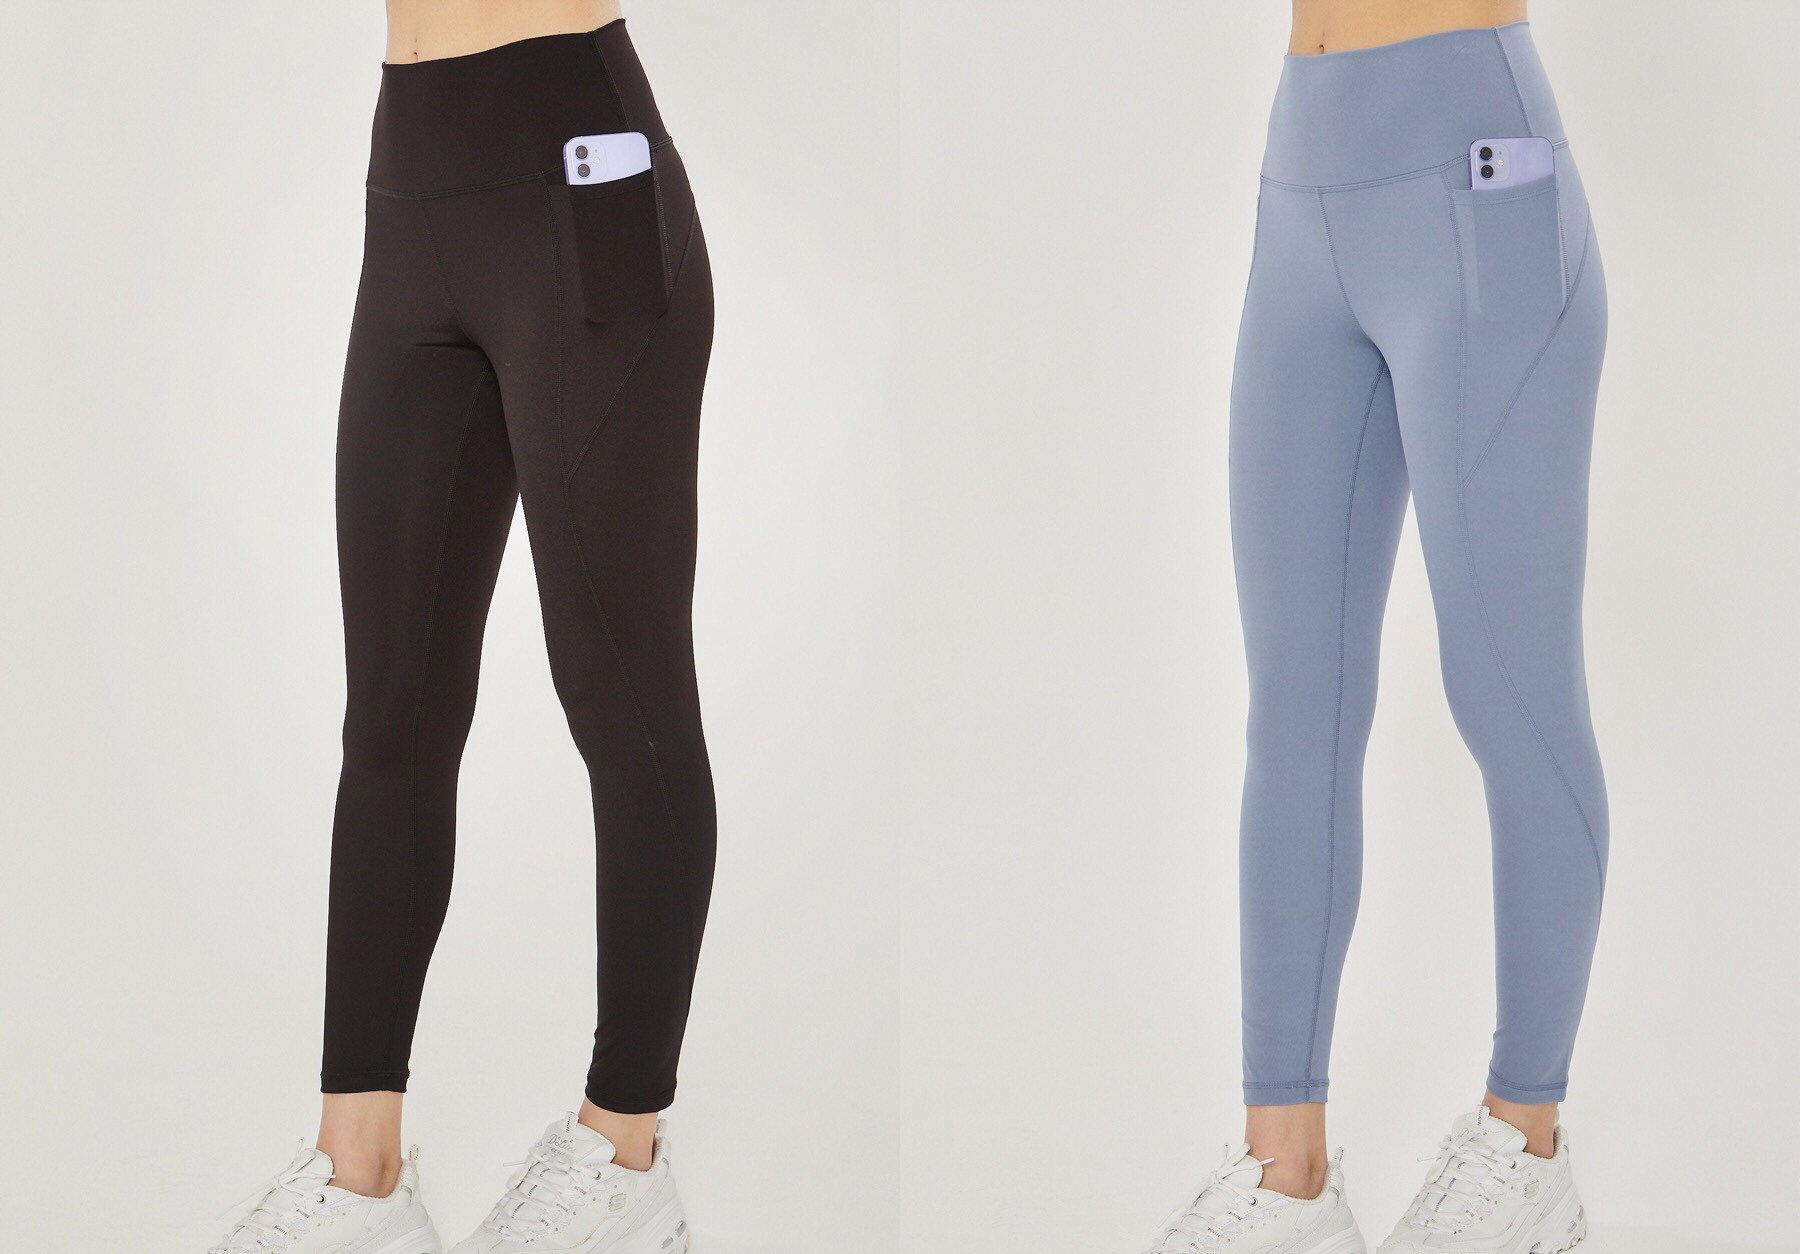 Buy Active Leggings With Phone Pockets. Wide Waistband Athletic